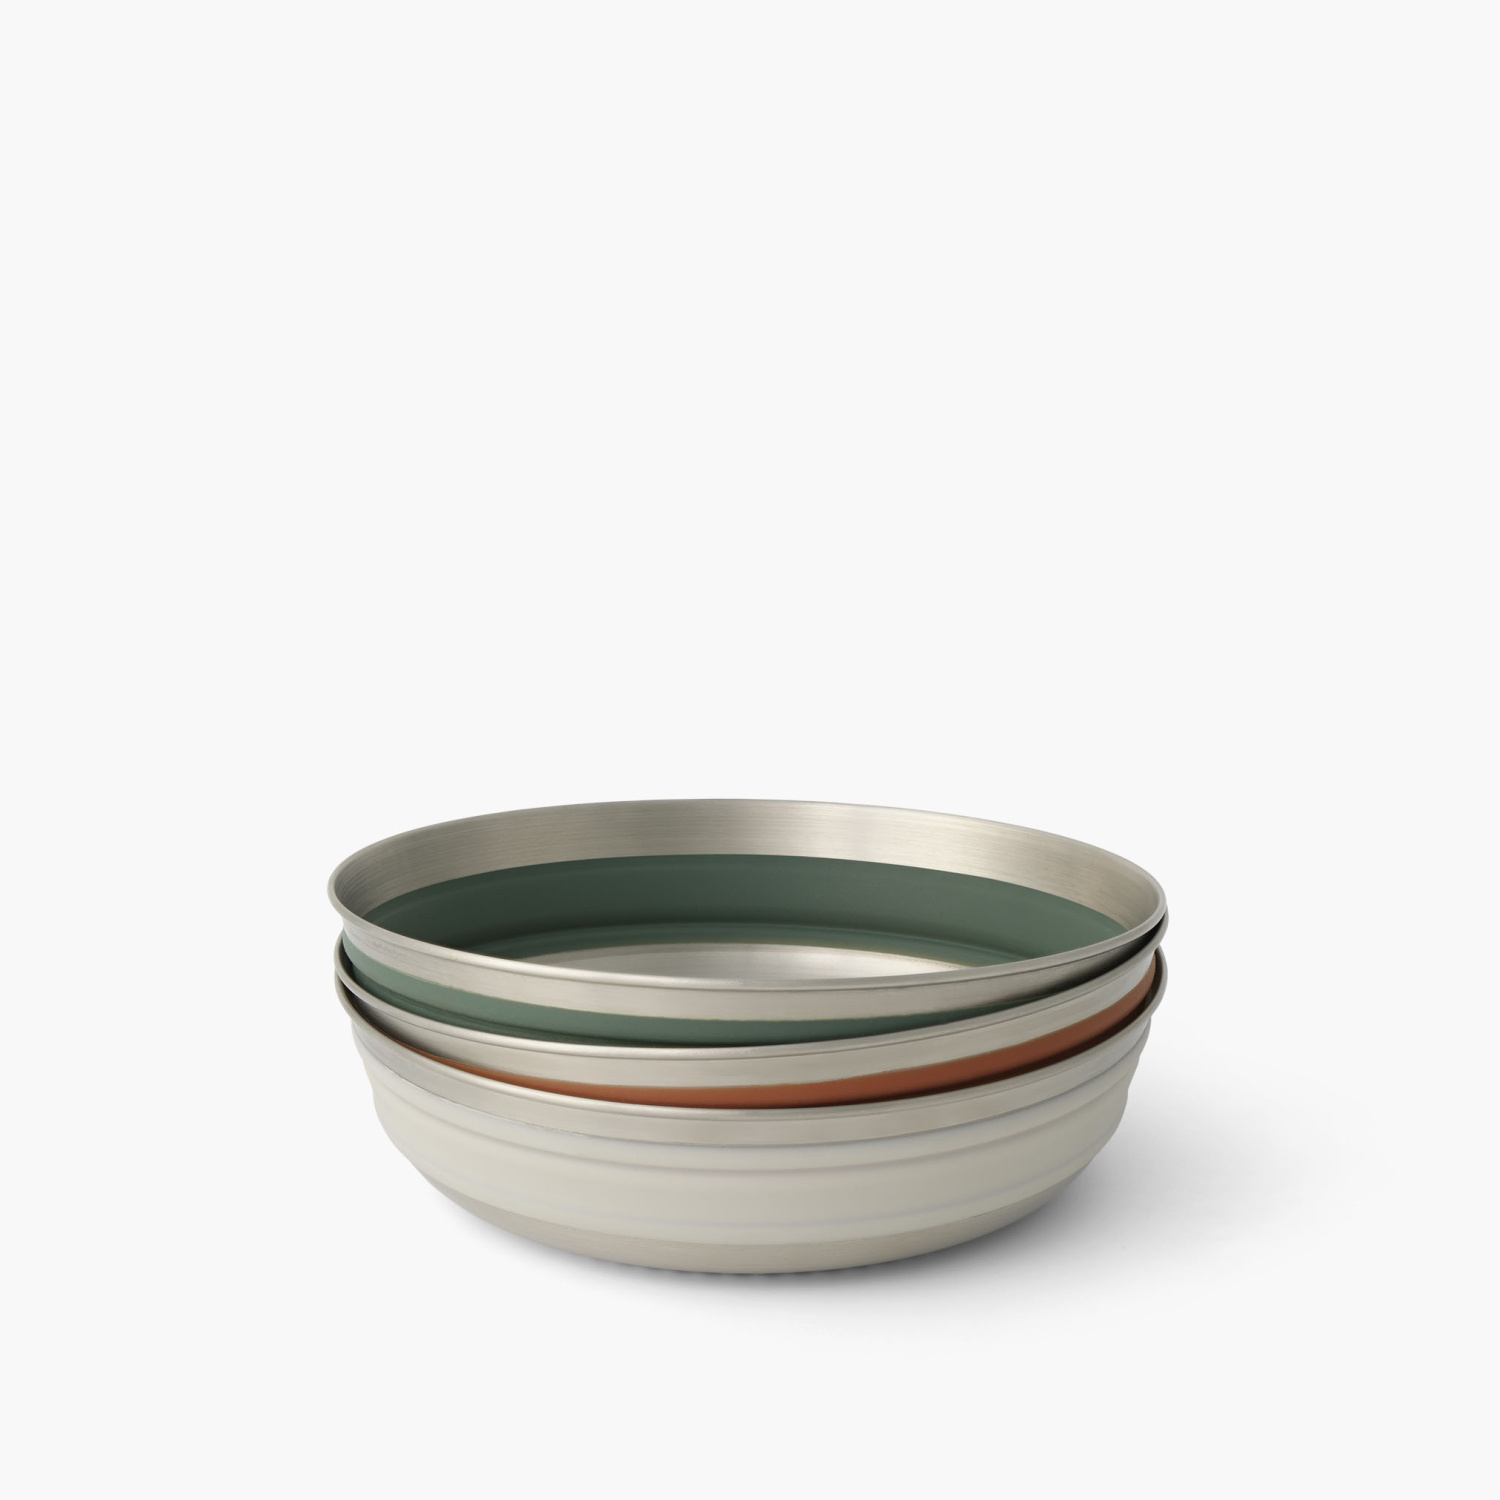 Sea To Summit Detour Stainless Steel Collapsible Bowl L Green